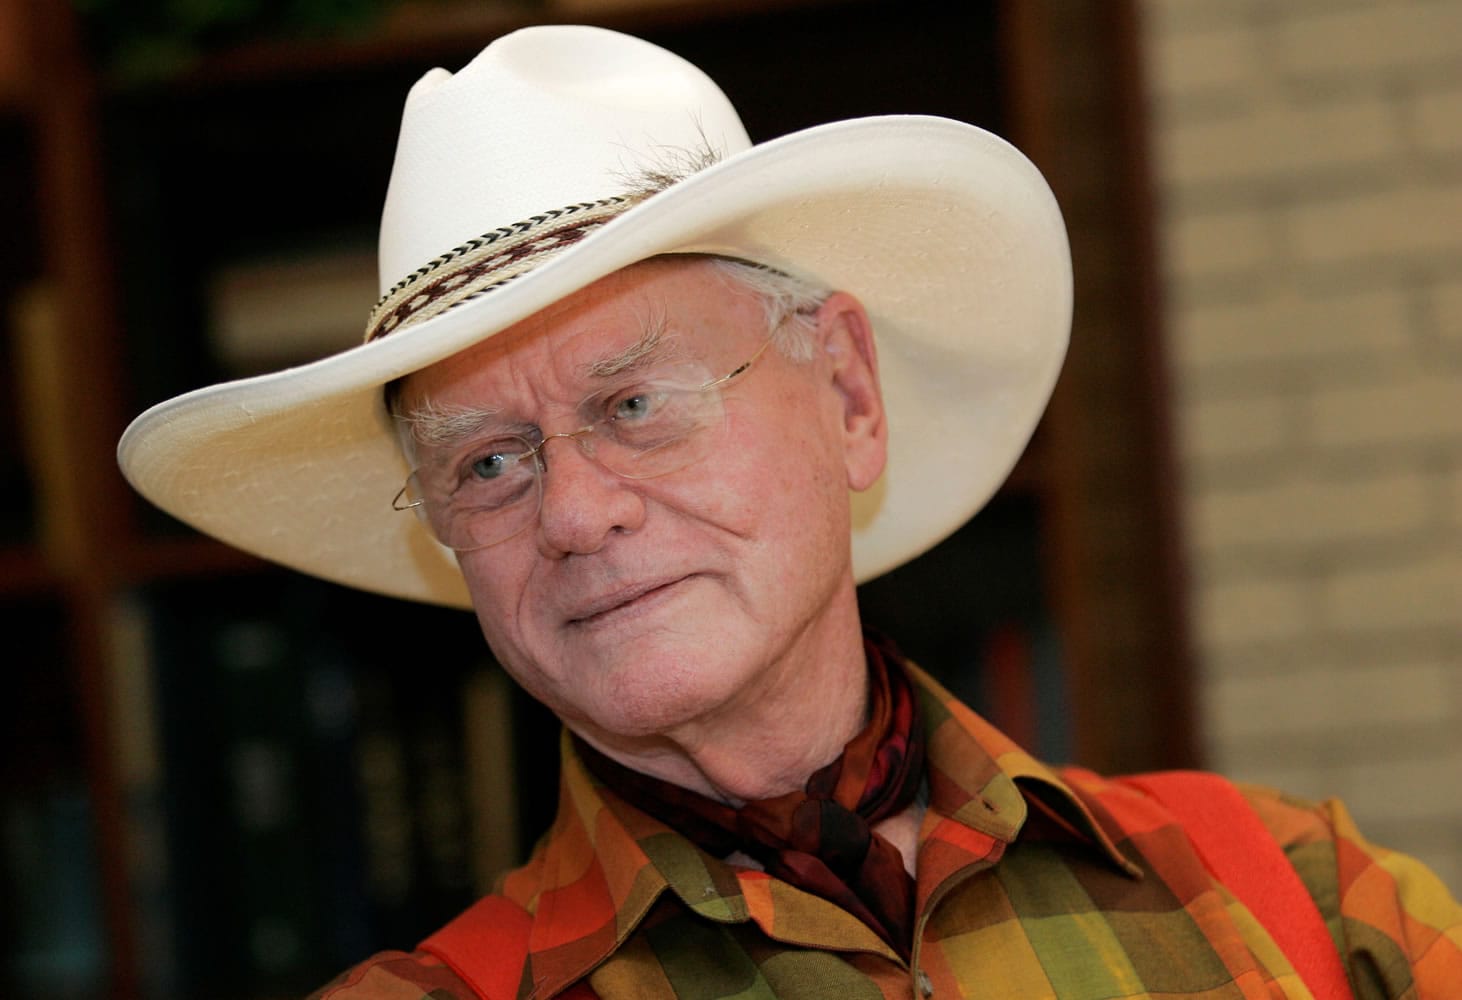 Actor Larry Hagman listens to a reporter's question in 2008 while visiting the Southfork Ranch in Parker, Texas, made famous in the television show &quot;Dallas.&quot; Actor Larry Hagman, who for more than a decade played villainous patriarch JR Ewing in the TV soap Dallas, has died at the age of 81, his family said Saturday.